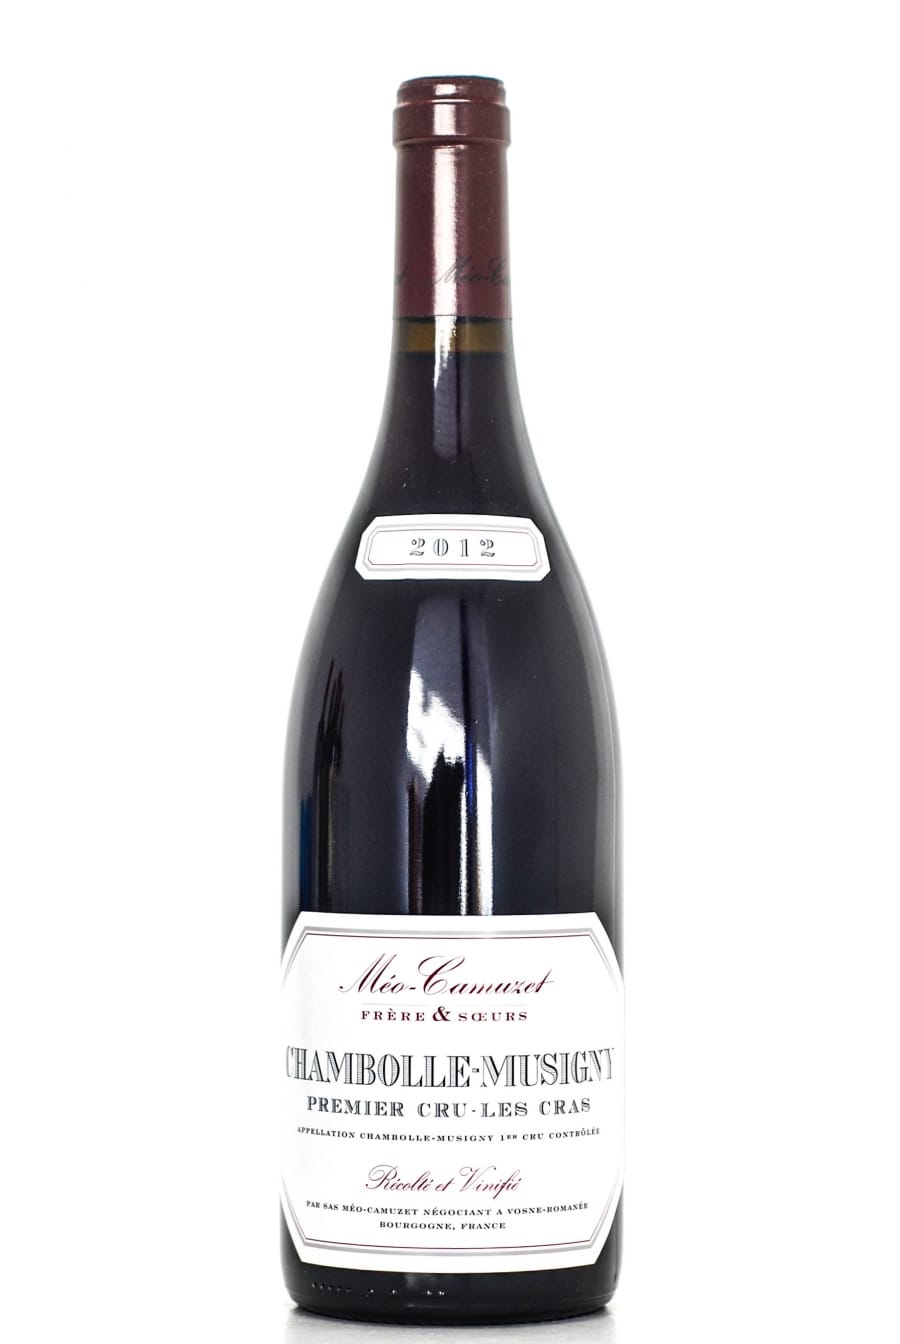 Meo Camuzet - Chambolle Musigny 1er cru les Cras 2012 Perfect